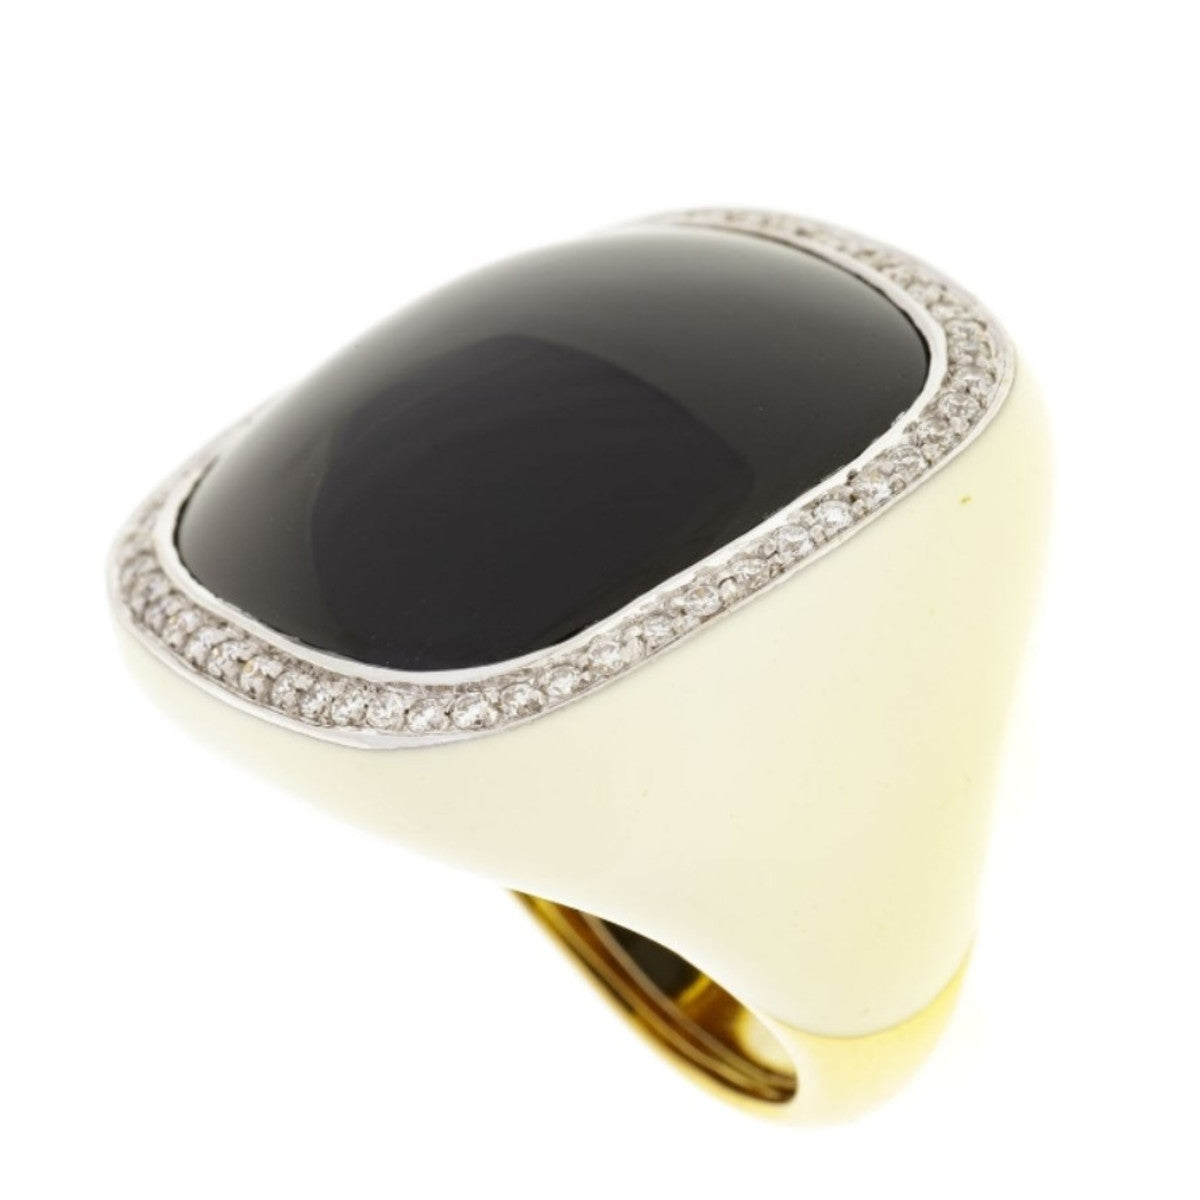 Post-1980s 18KT Yellow Gold Onyx, Diamond & Lacquer Ring angled side view